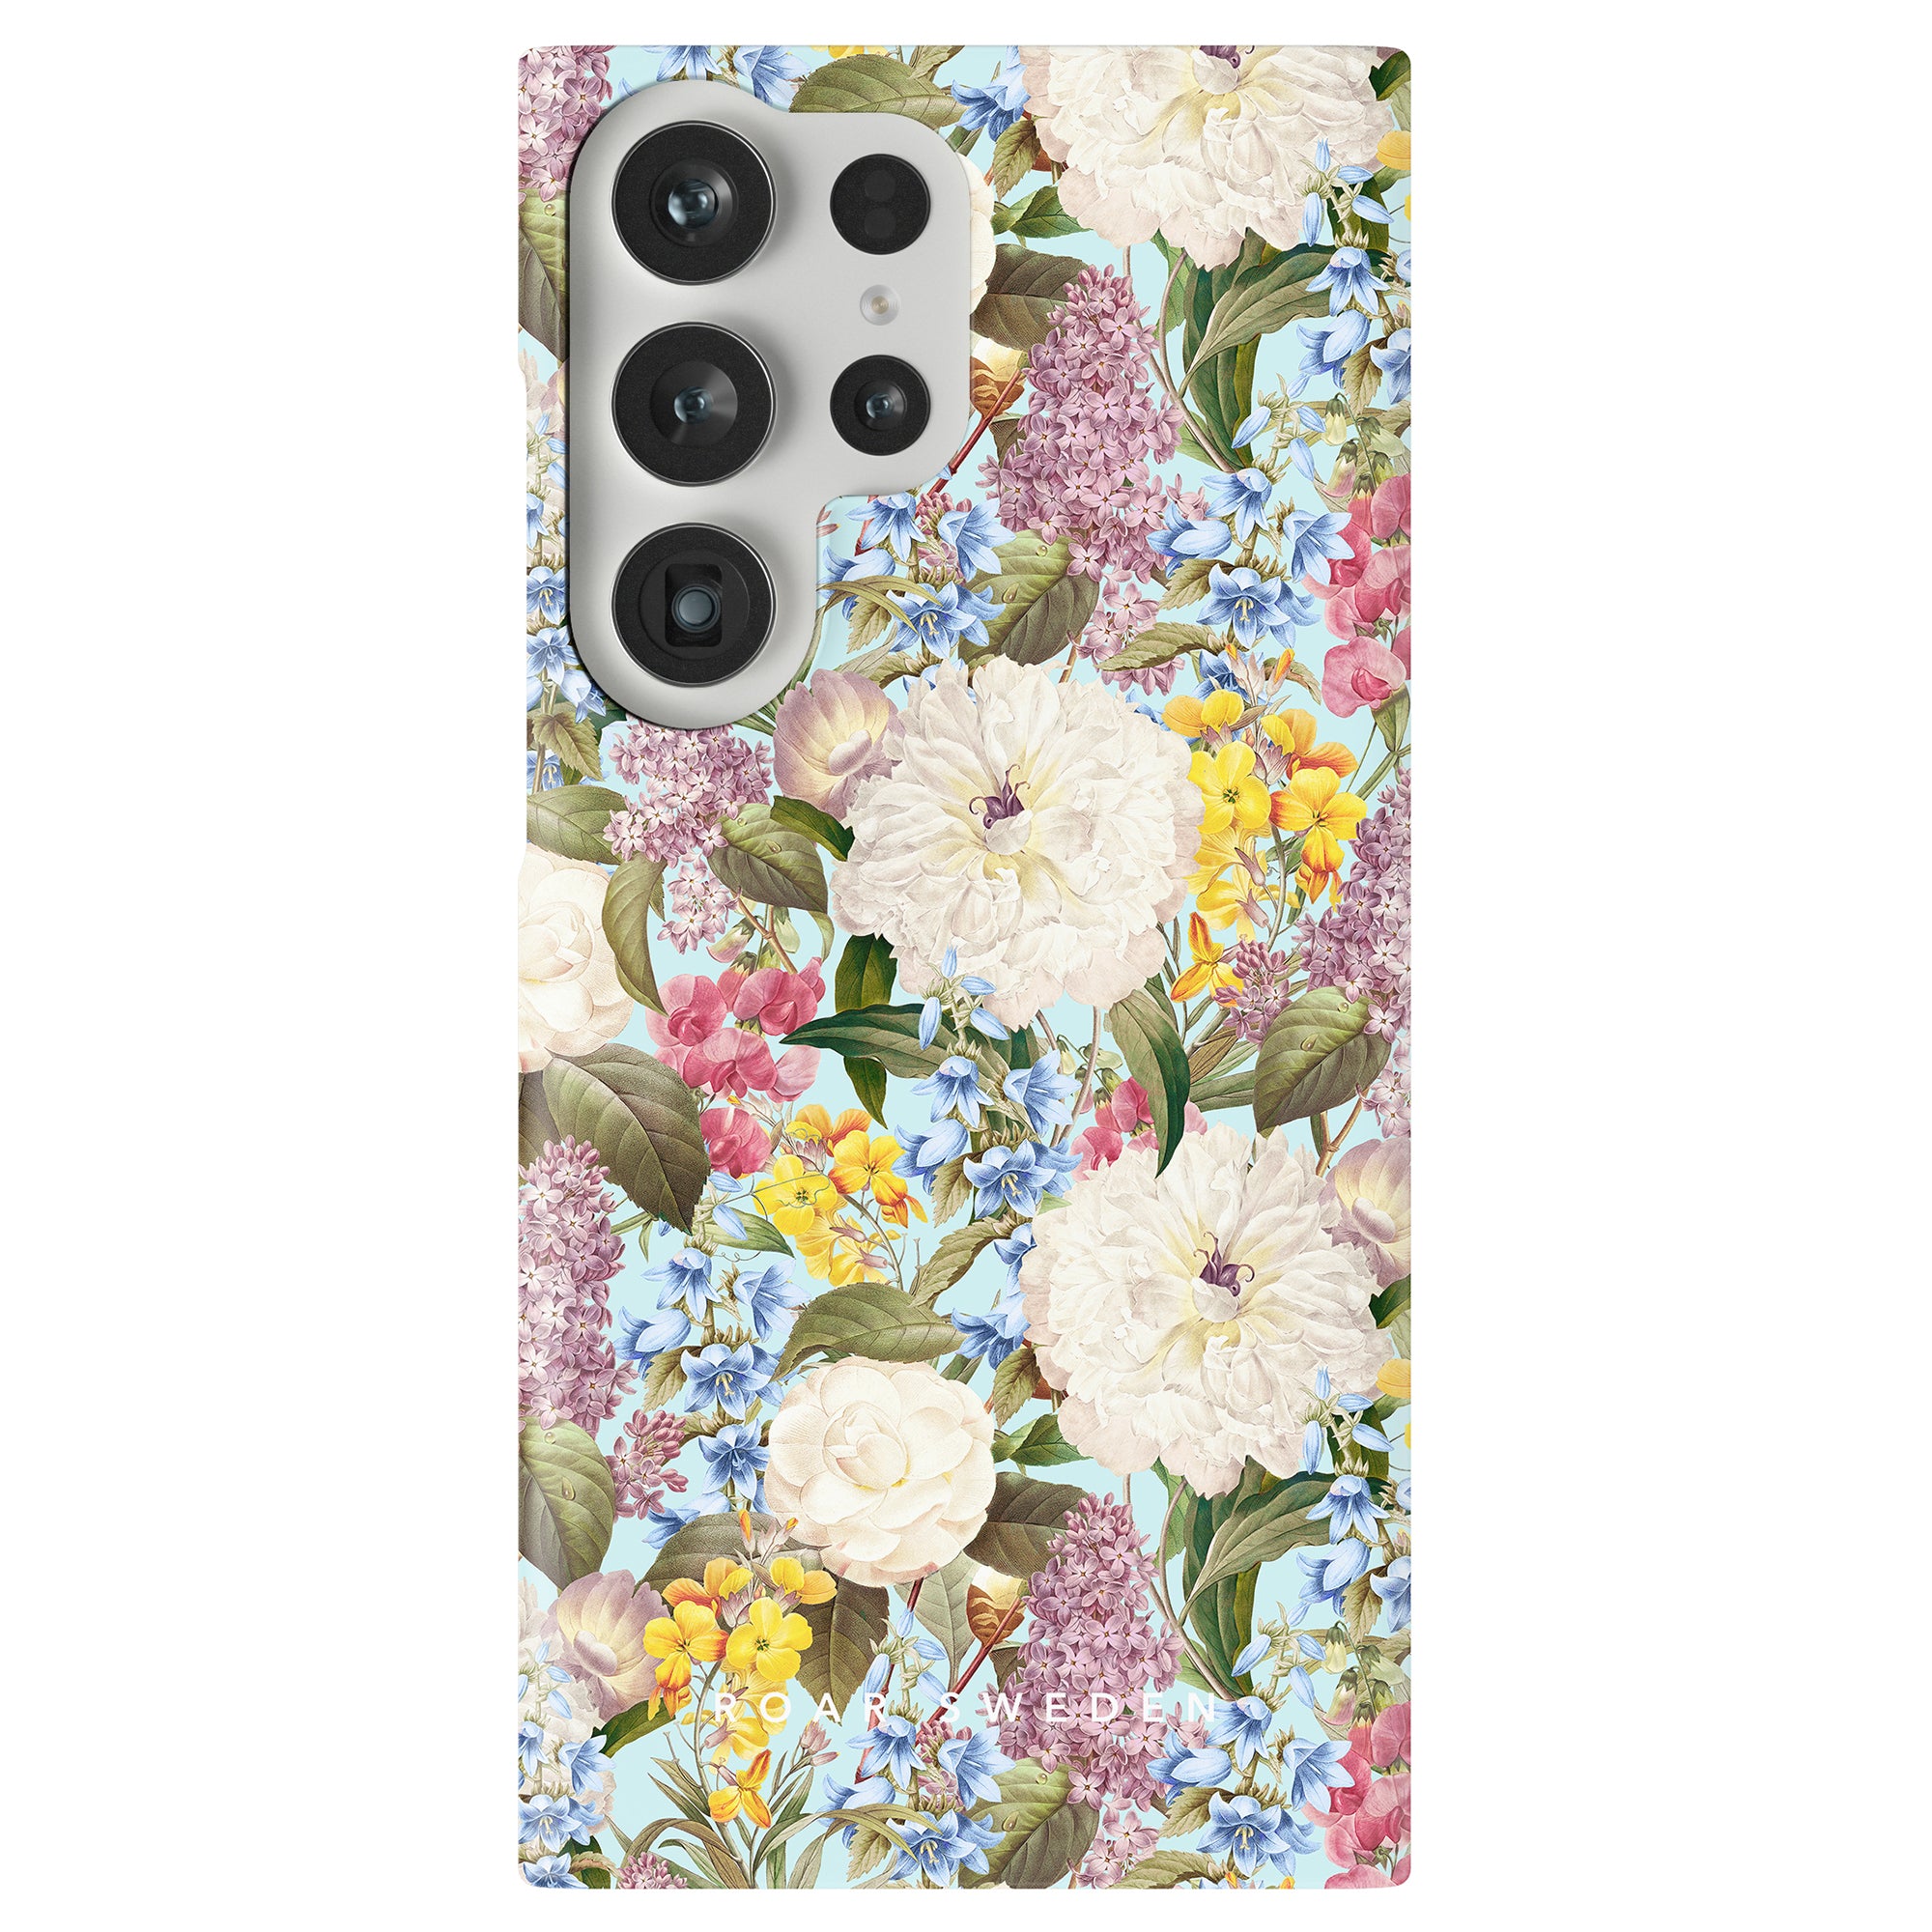 A product description for a Fragrant Paradise - Slim case smartphone with a triple-camera setup, optimized for SEO.